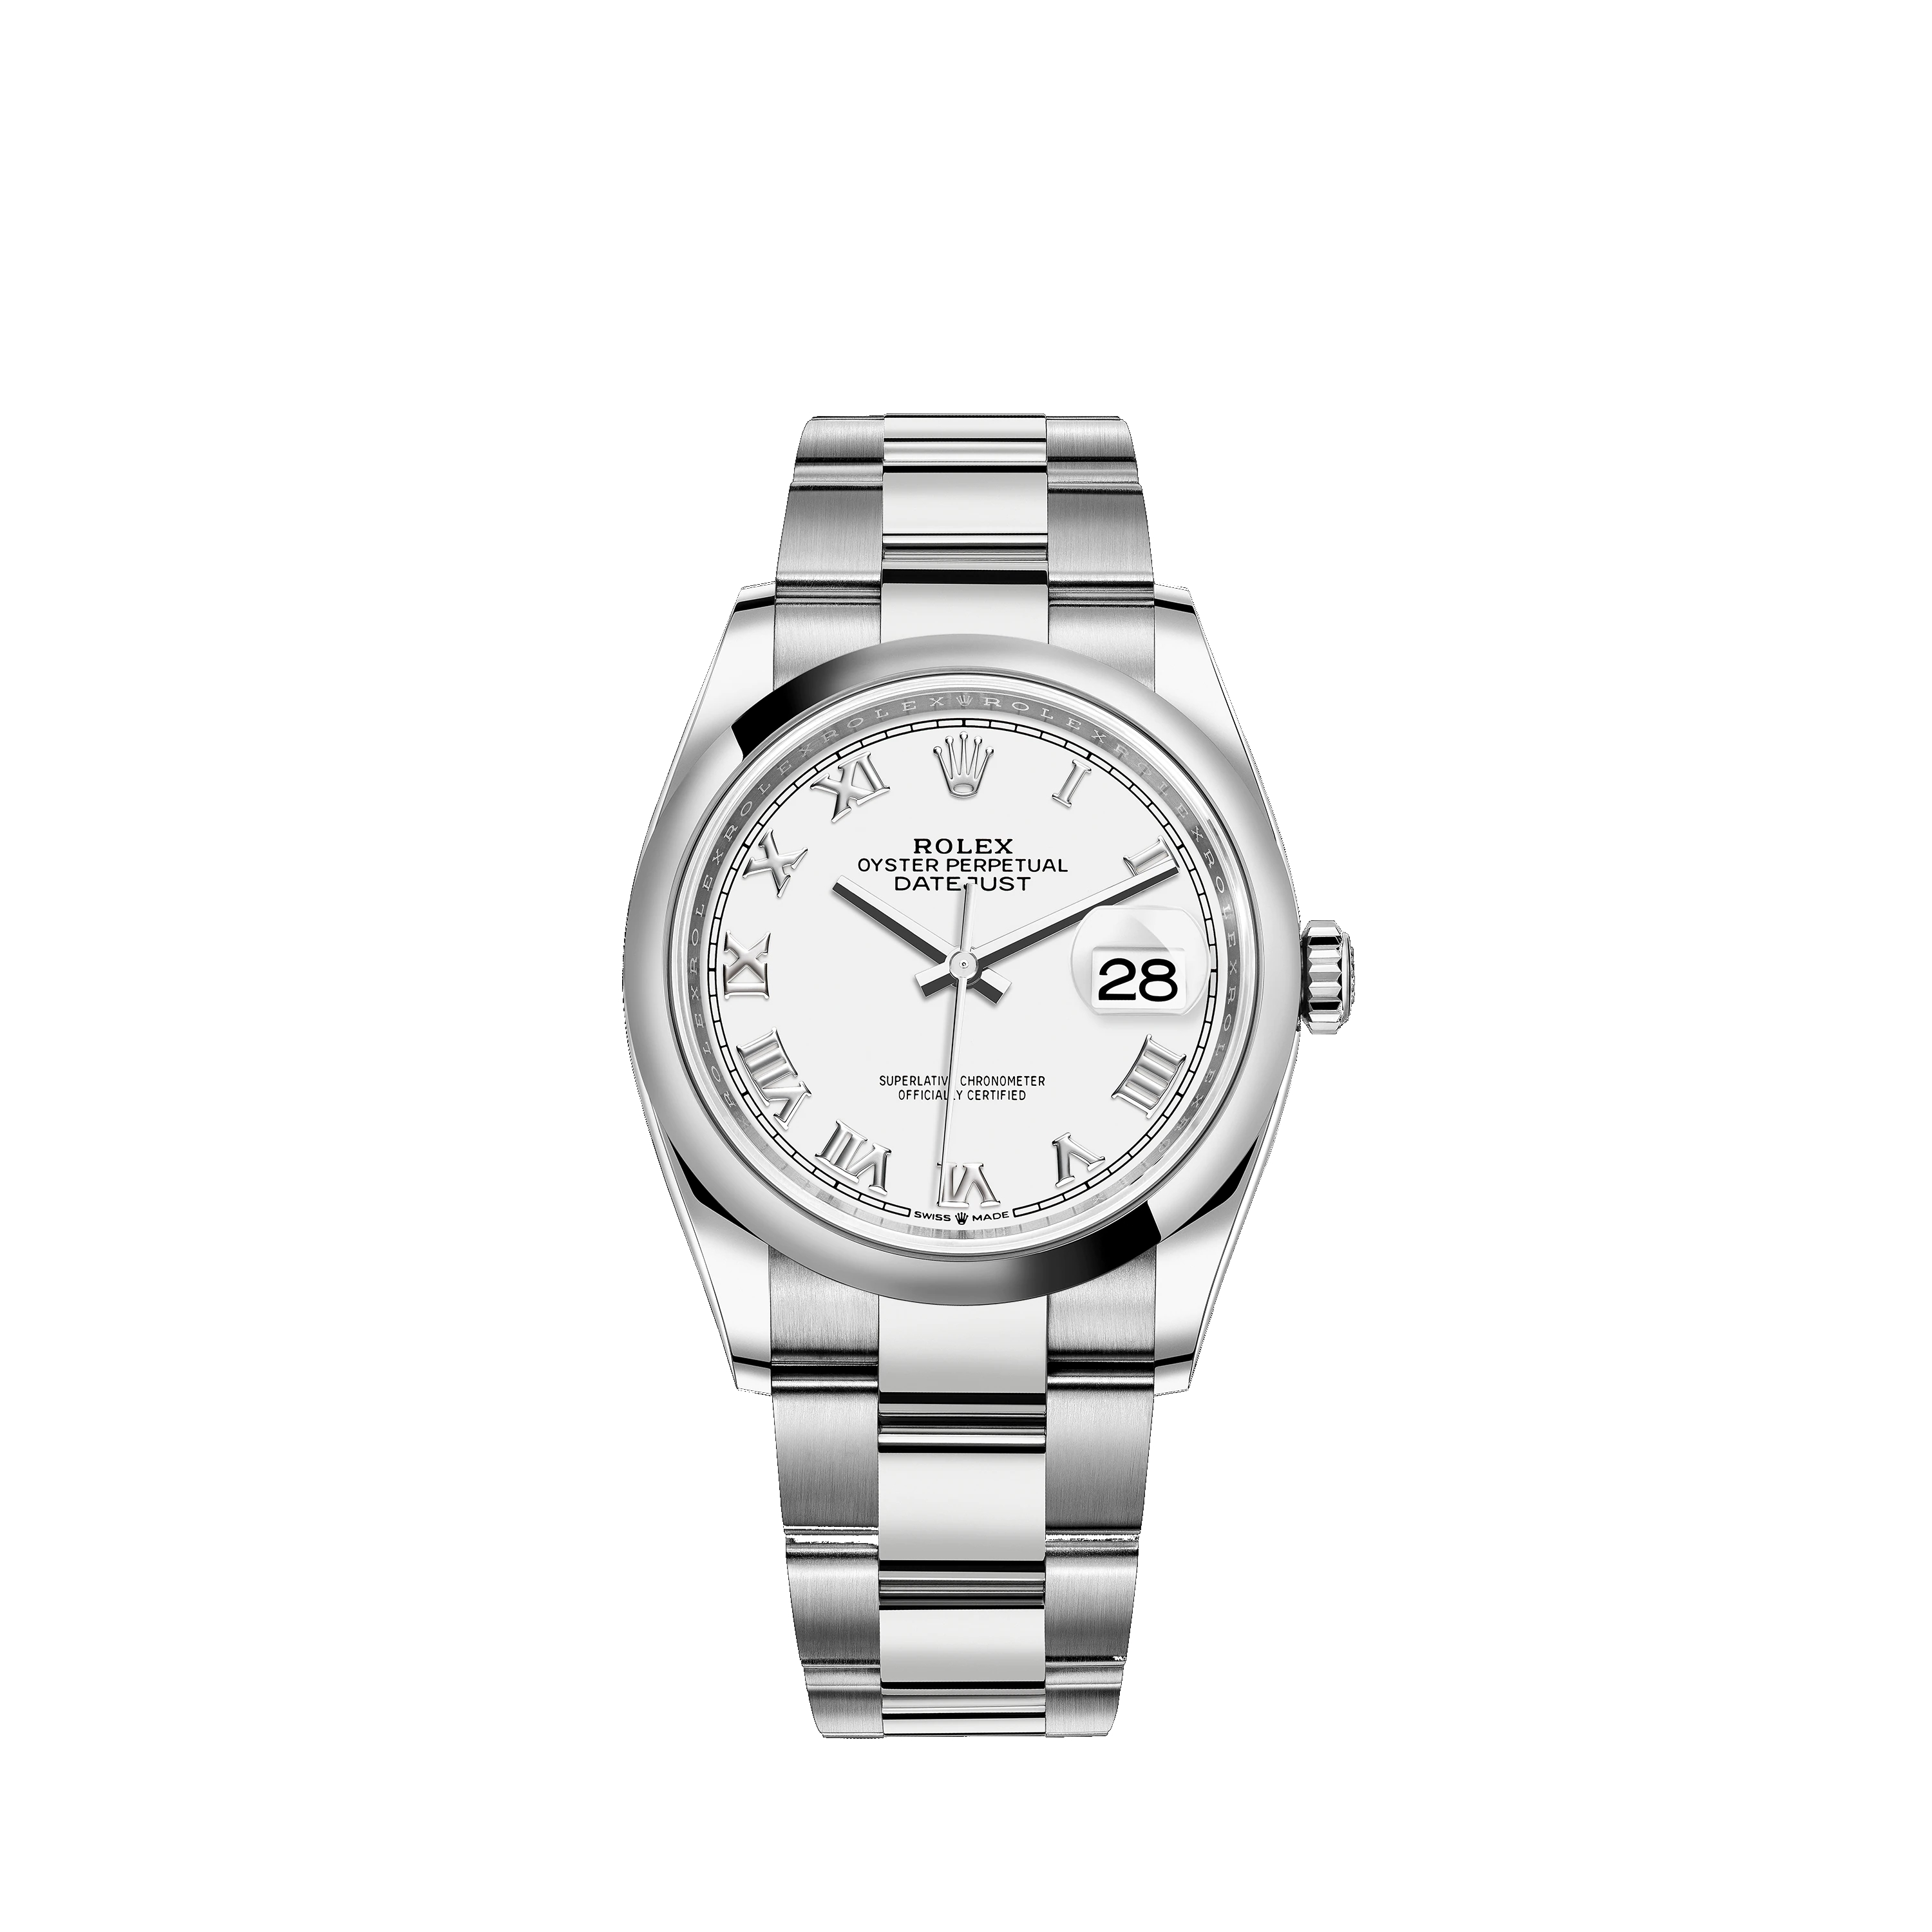 Datejust 36 126200 Stainless Steel Watch (White)